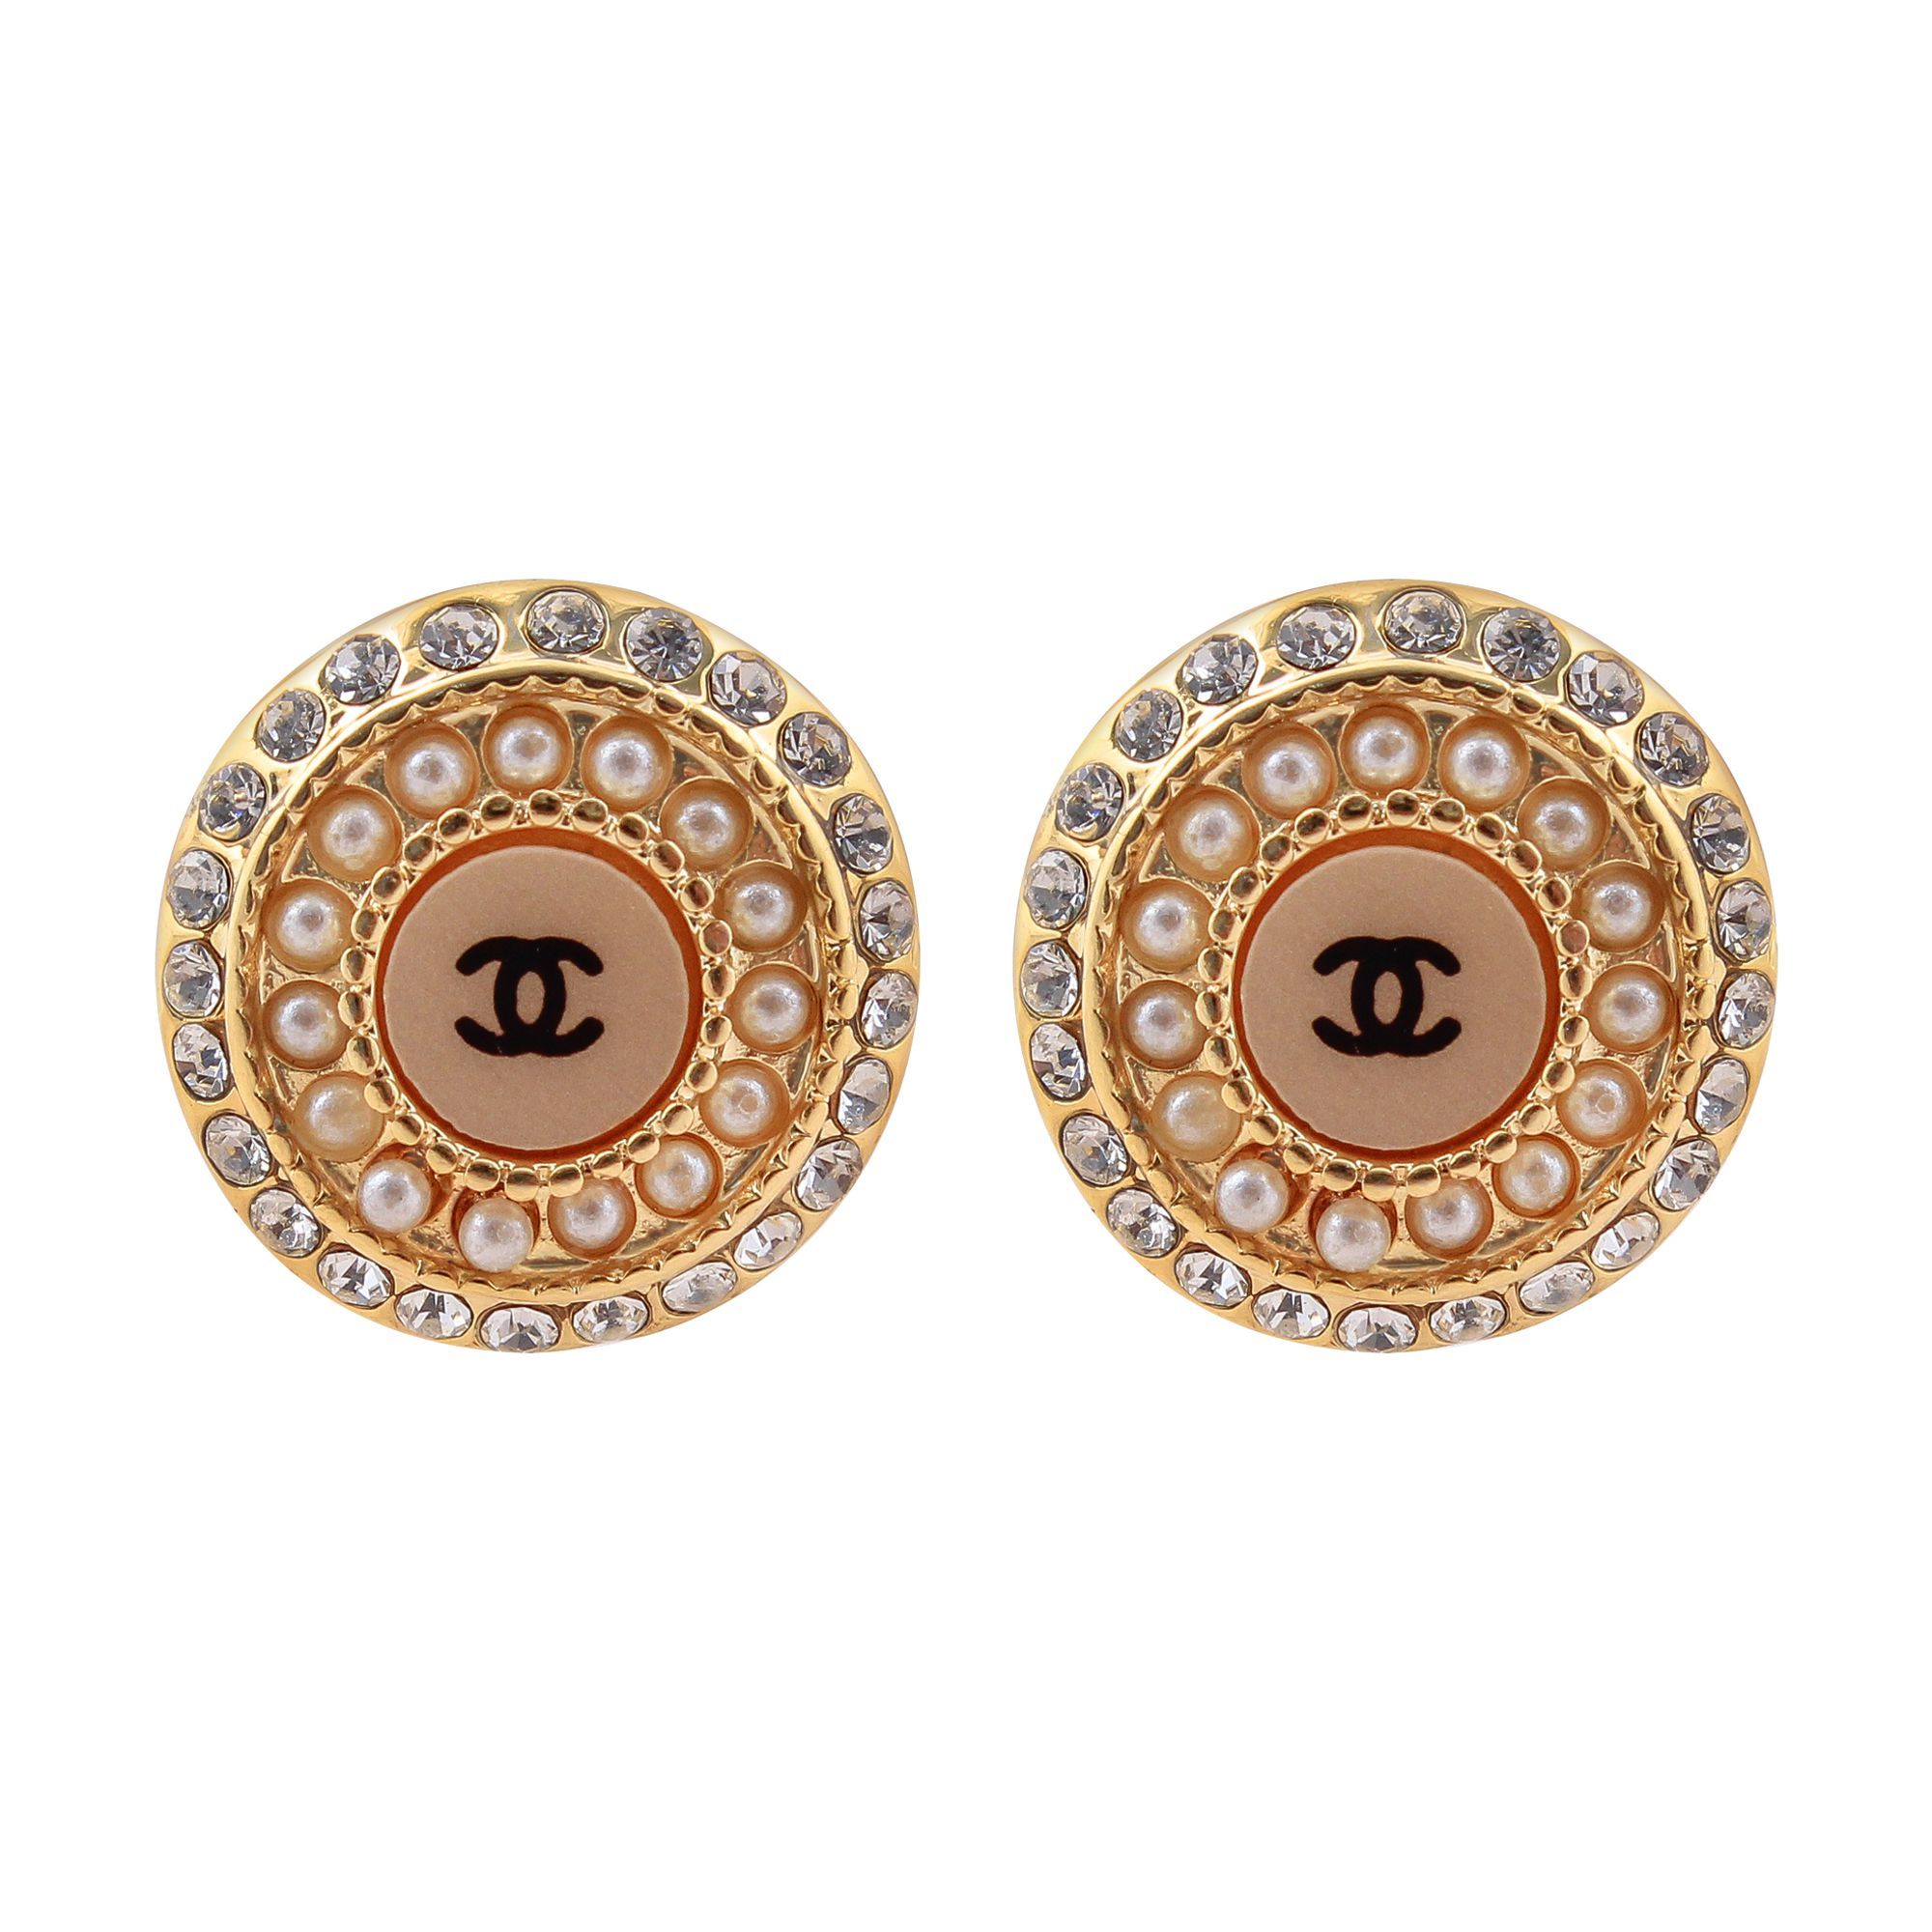 Buy Channel Style Girls Earrings, White, NS-040 Online at Special Price ...